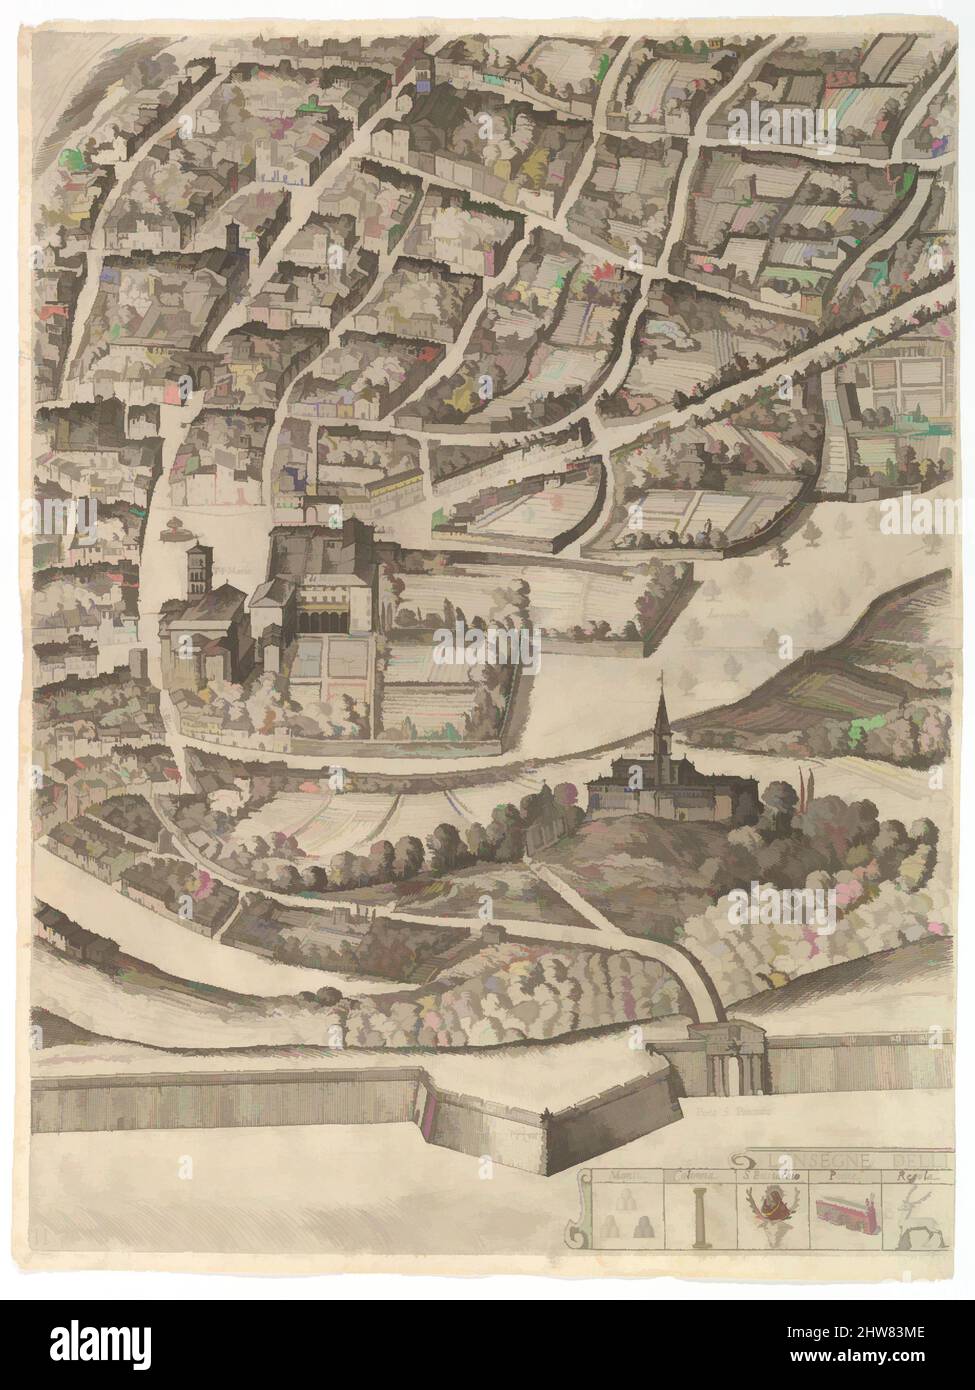 Art inspired by Plan of the City of Rome. Part 11 with the San Pancrazio (left bank), 1645, Etching with some engraving, undescribed state., Sheet: 21 13/16 x 16 5/16 in. (55.4 x 41.5 cm), Prints, Antonio Tempesta (Italian, Florence 1555–1630 Rome), Part of the lower half of the map of, Classic works modernized by Artotop with a splash of modernity. Shapes, color and value, eye-catching visual impact on art. Emotions through freedom of artworks in a contemporary way. A timeless message pursuing a wildly creative new direction. Artists turning to the digital medium and creating the Artotop NFT Stock Photo